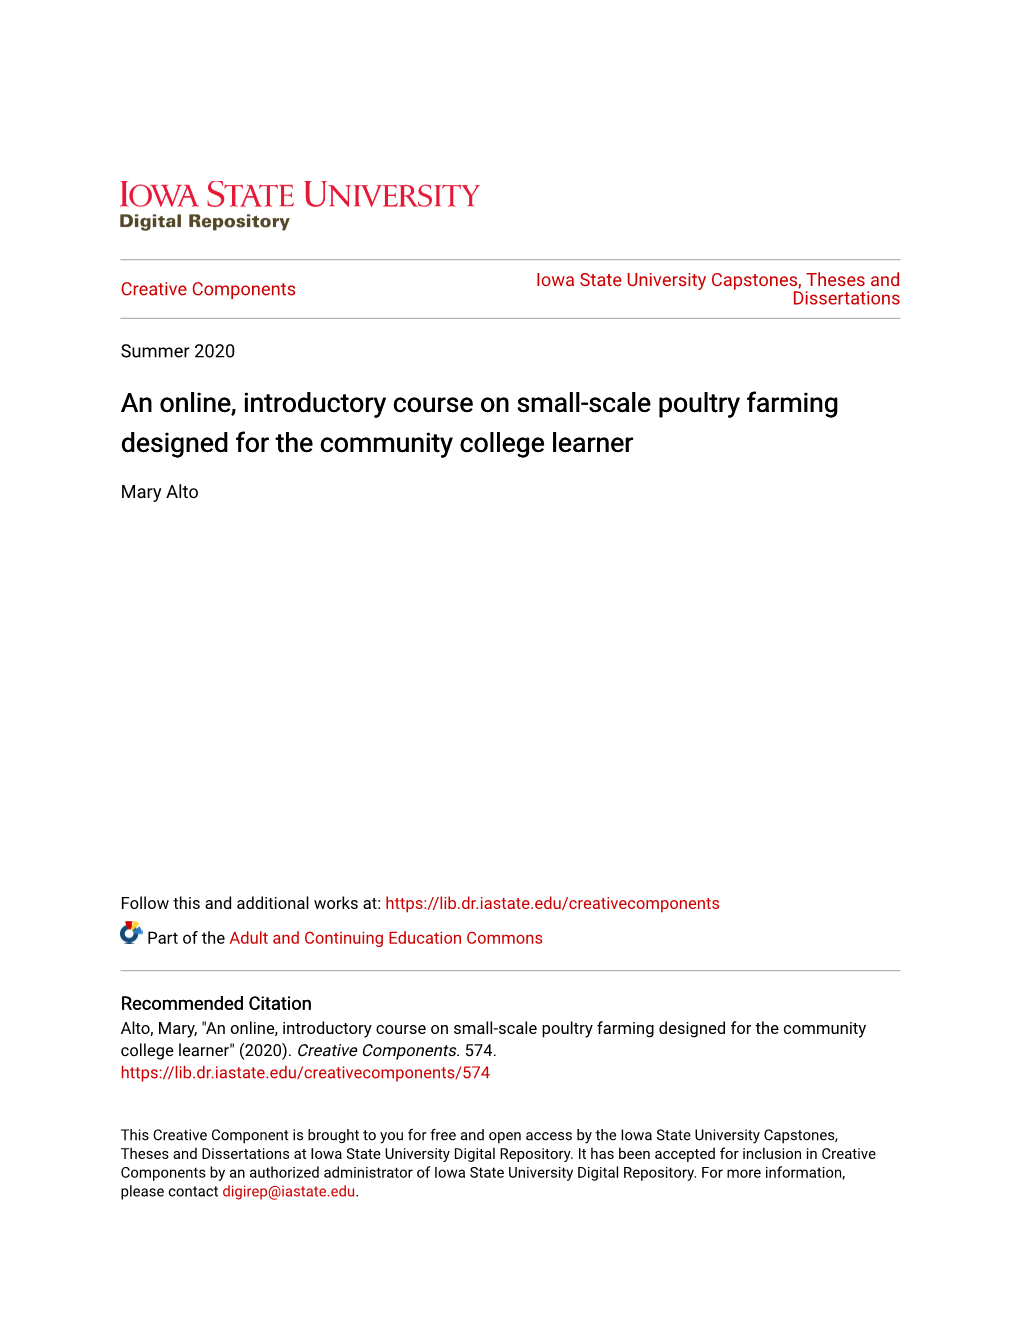 An Online, Introductory Course on Small-Scale Poultry Farming Designed for the Community College Learner